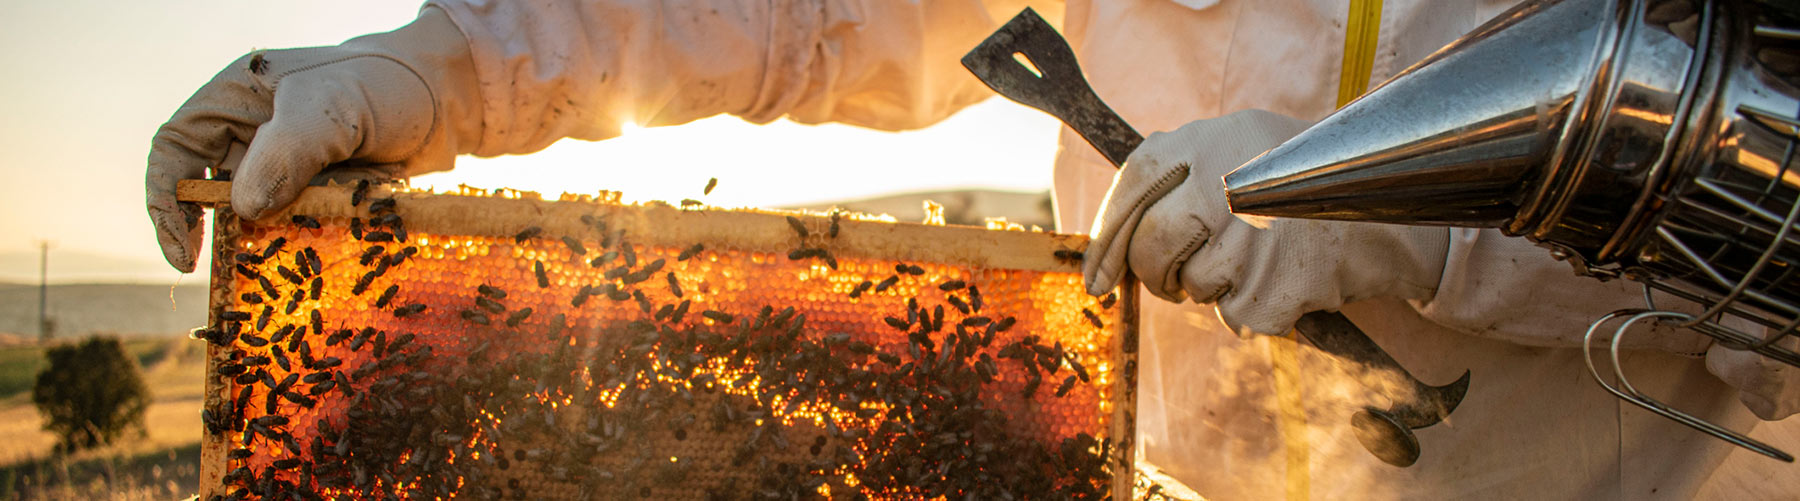 Person removing a honeycomb from a bee hive